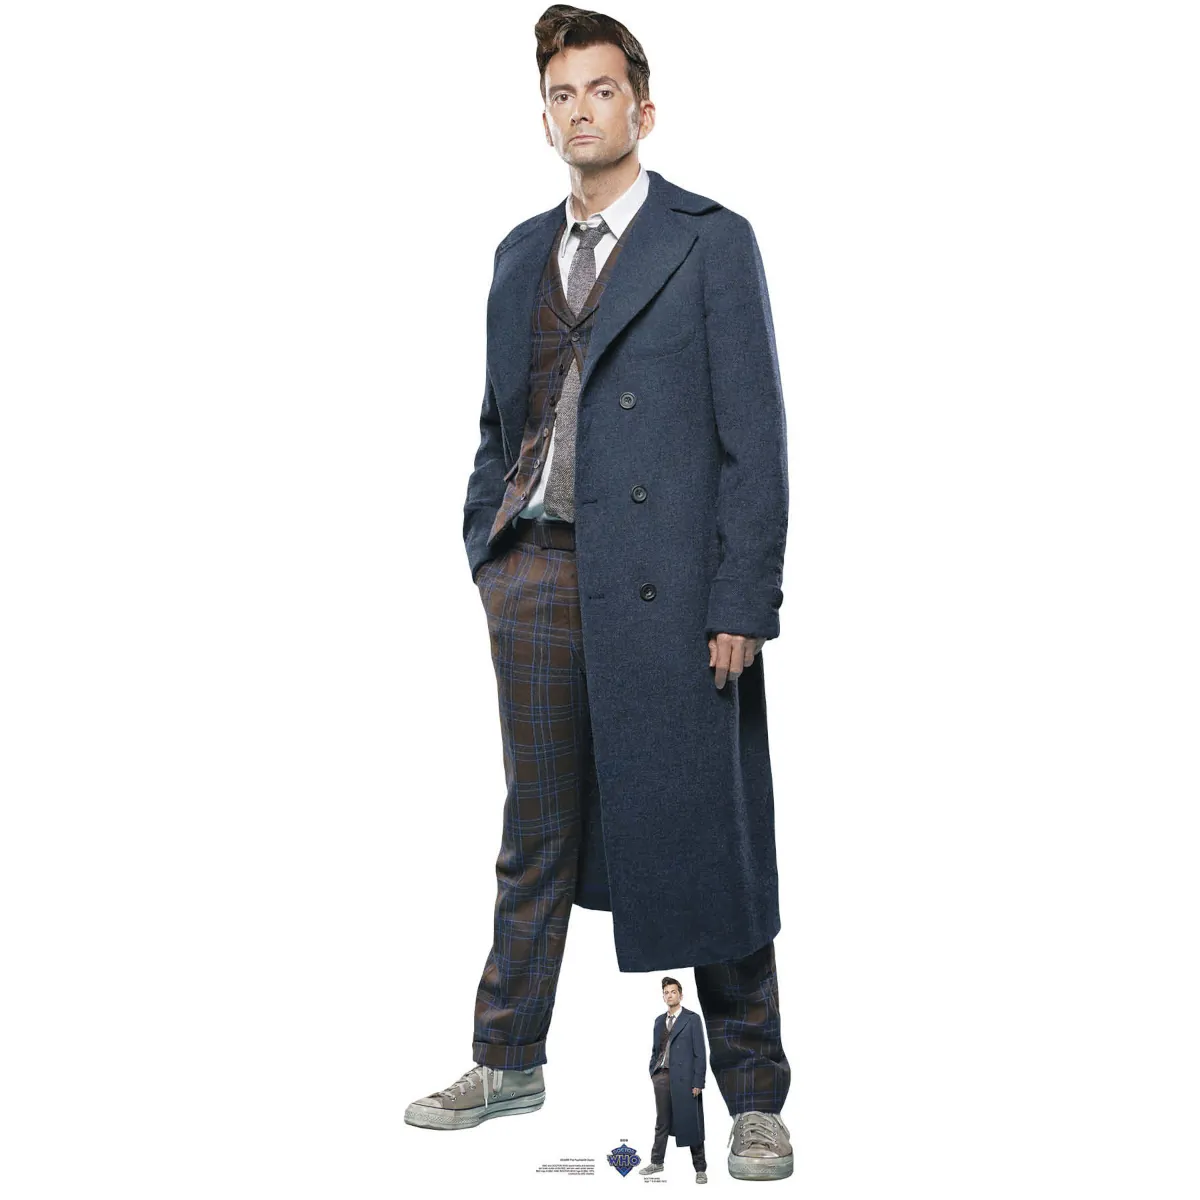 SC4206 The Fourteenth Doctor 'David Tennant' (Doctor Who) Lifesize + Mini Cardboard Cutout Standee Front